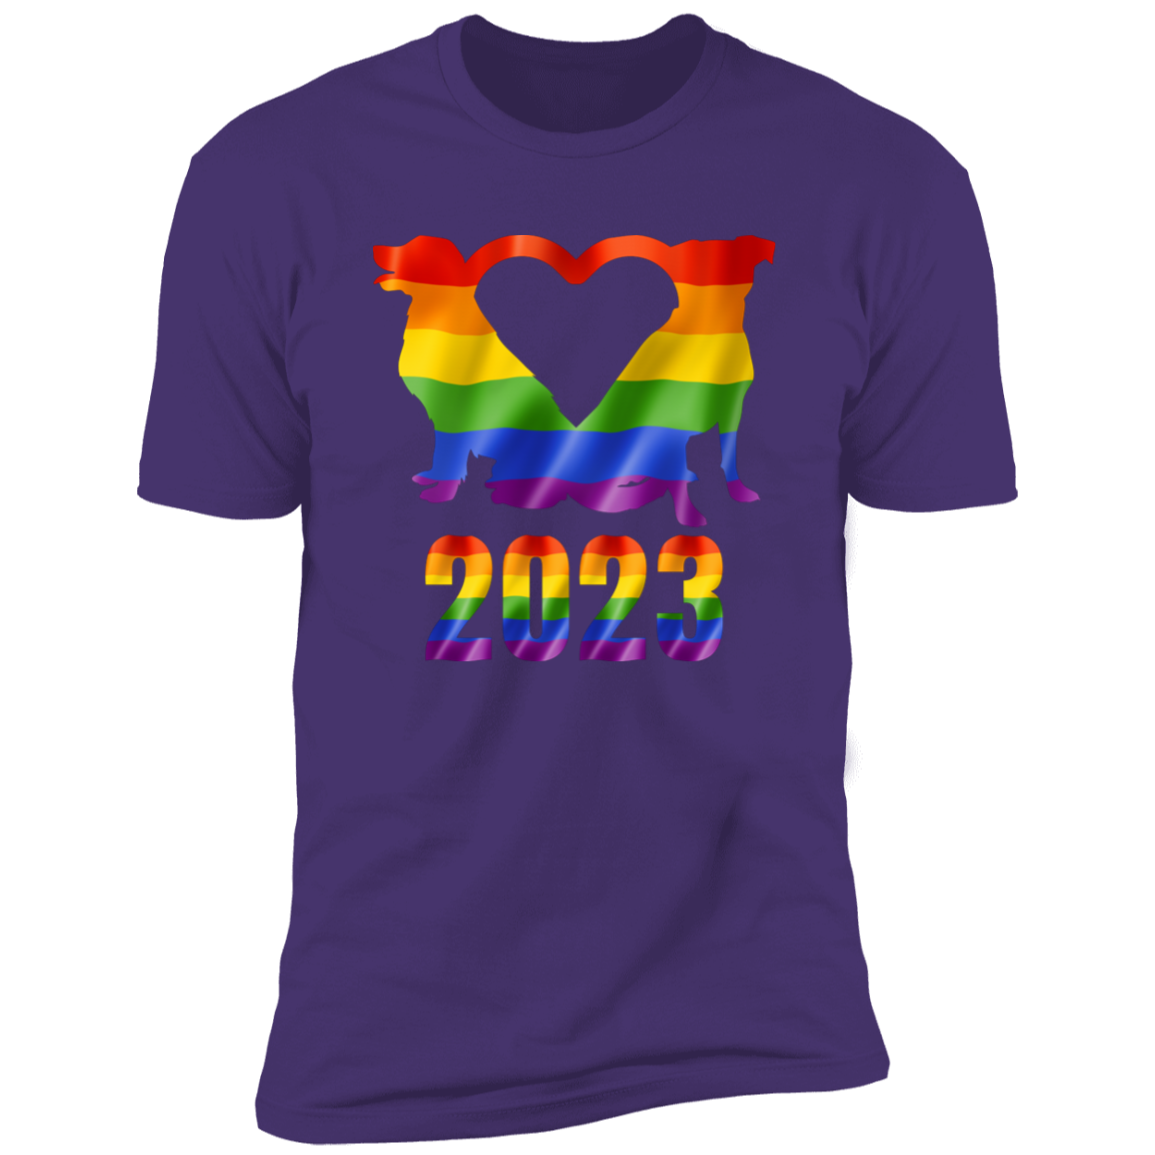 Dog Pride 2023, dog pride dog shirt for humans, in purple rush